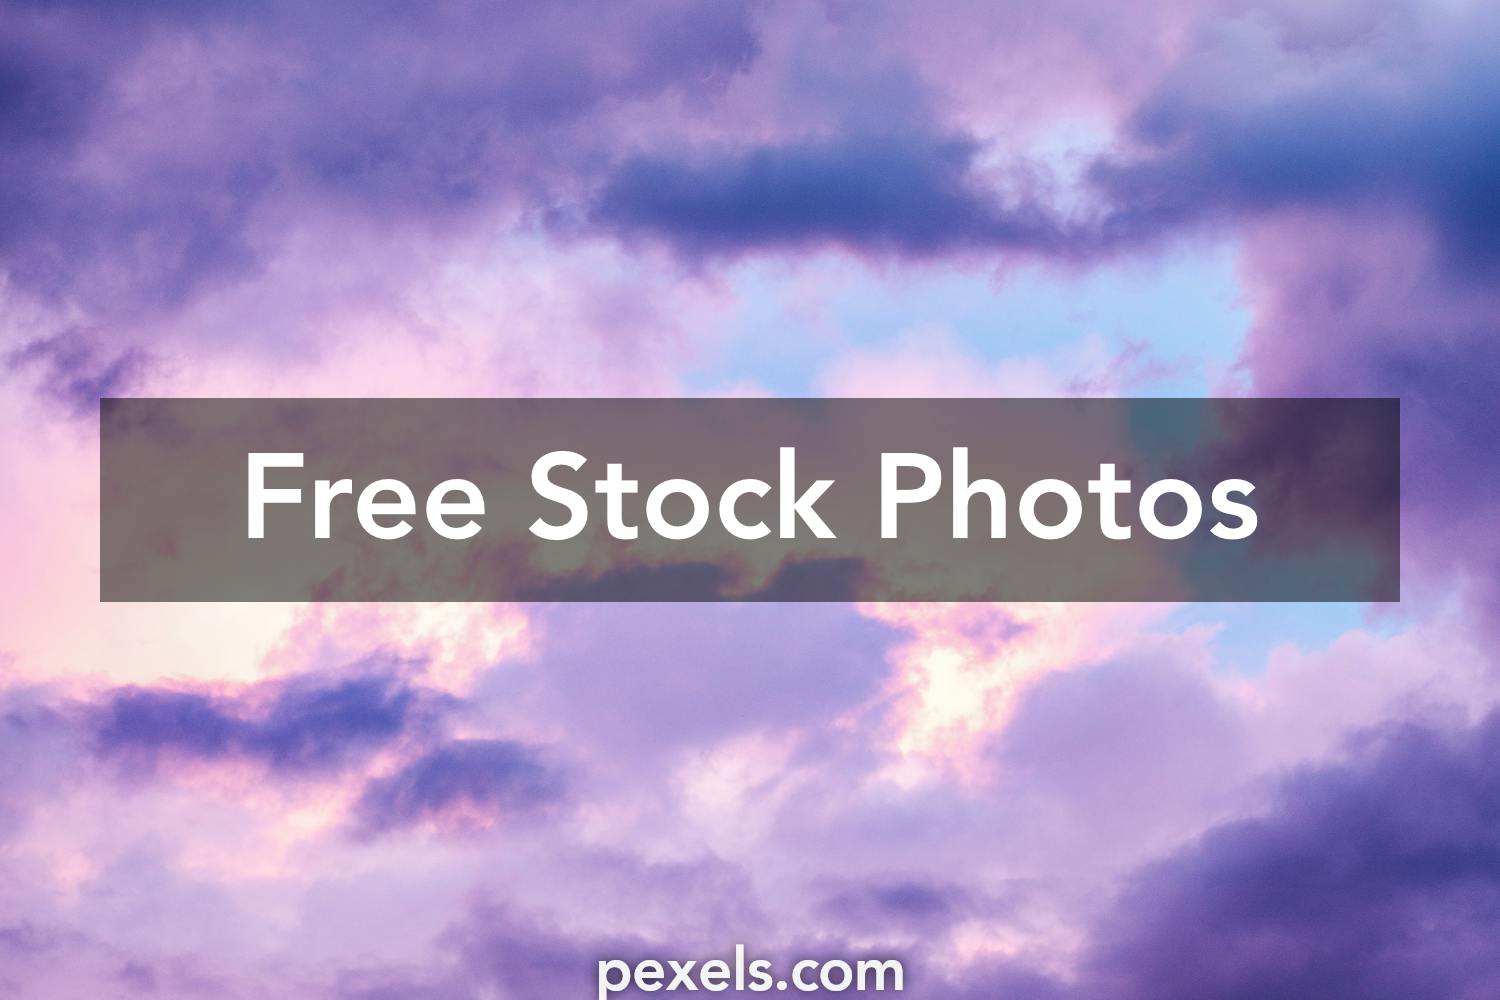 Make Your Screen Stand Out with Free Background Images! · Pexels